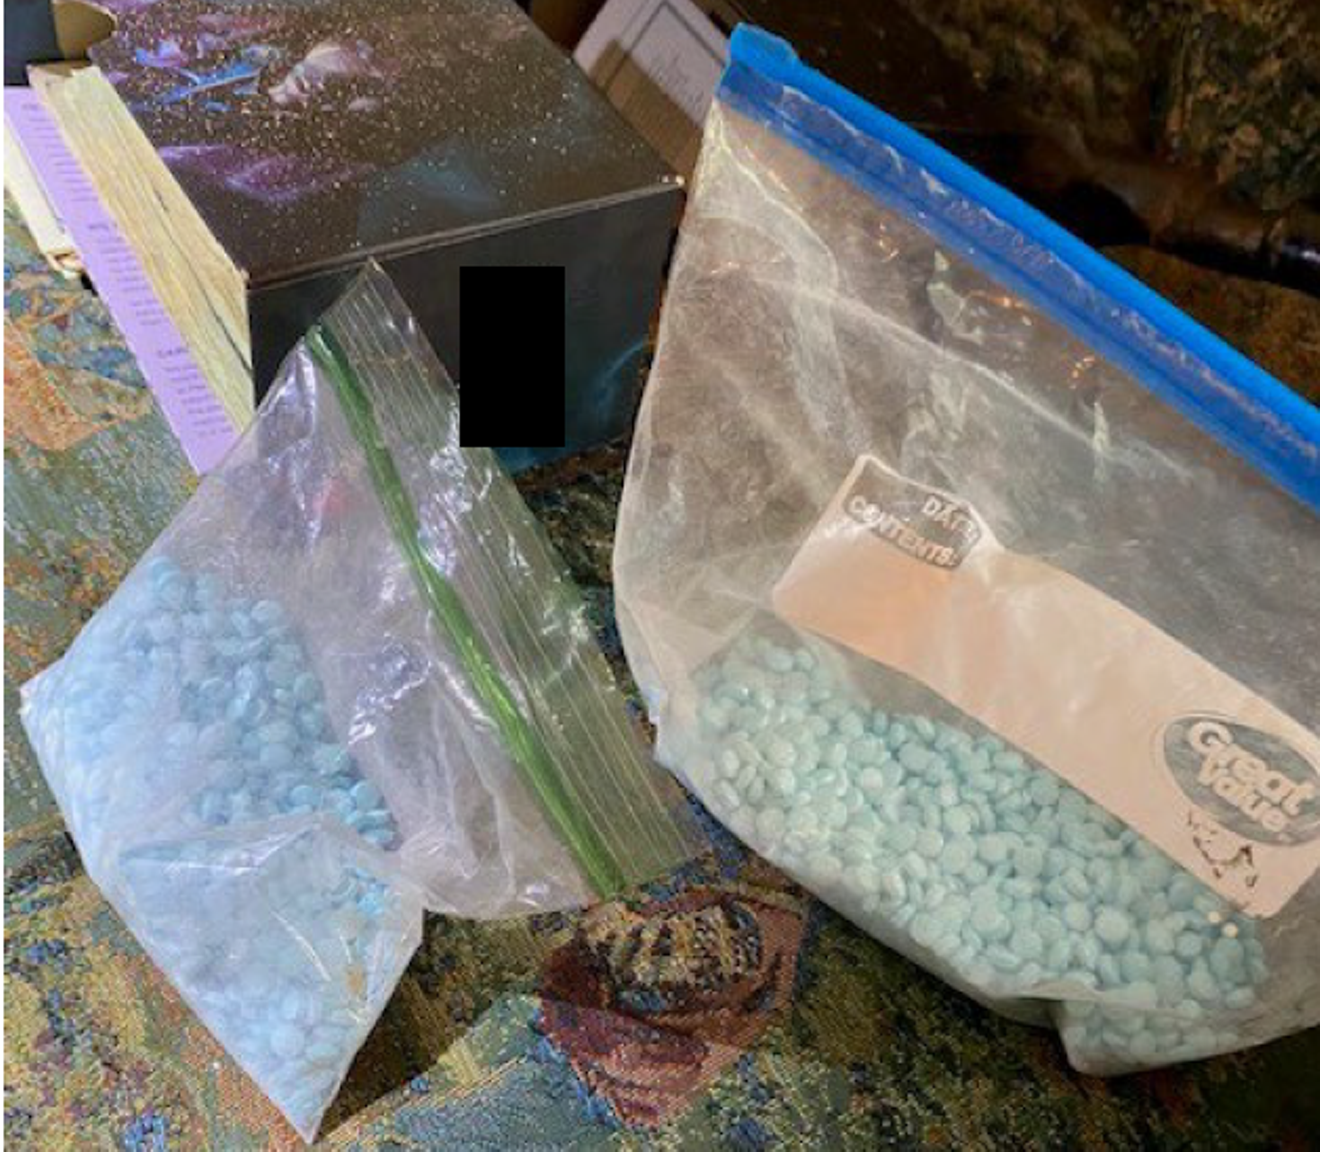 Some of the Fentanyl pills seized by authorities in a 2023 Carrollton drug bust.